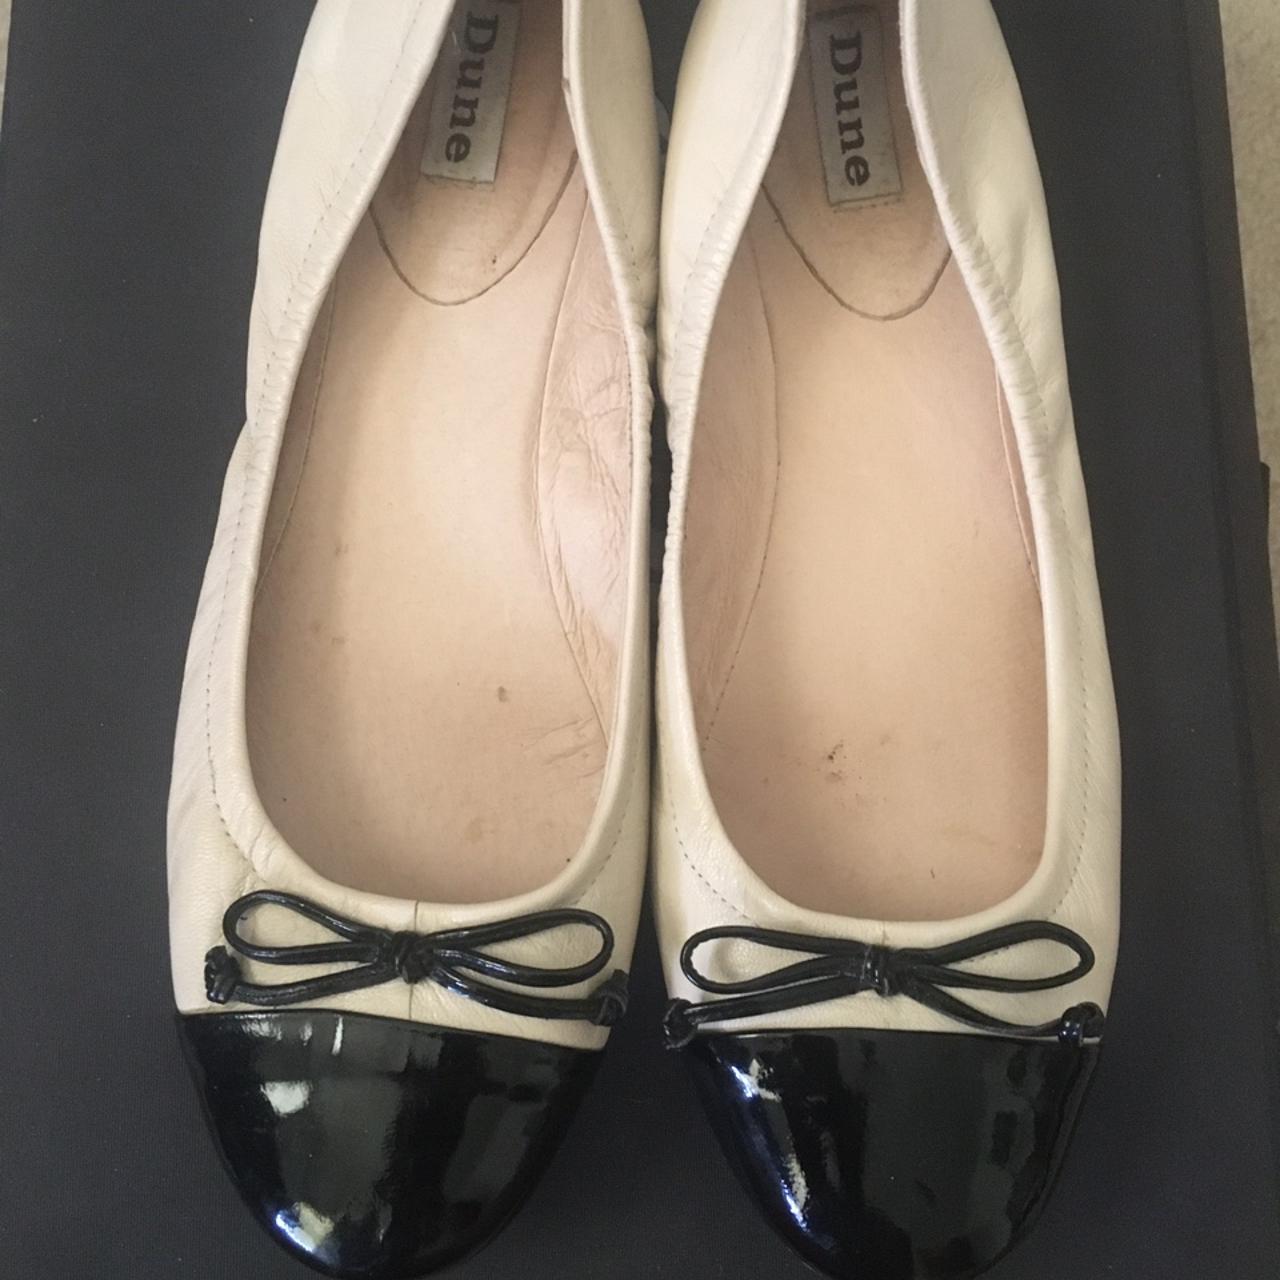 Dune classic Chanel style flats, Real leather, A